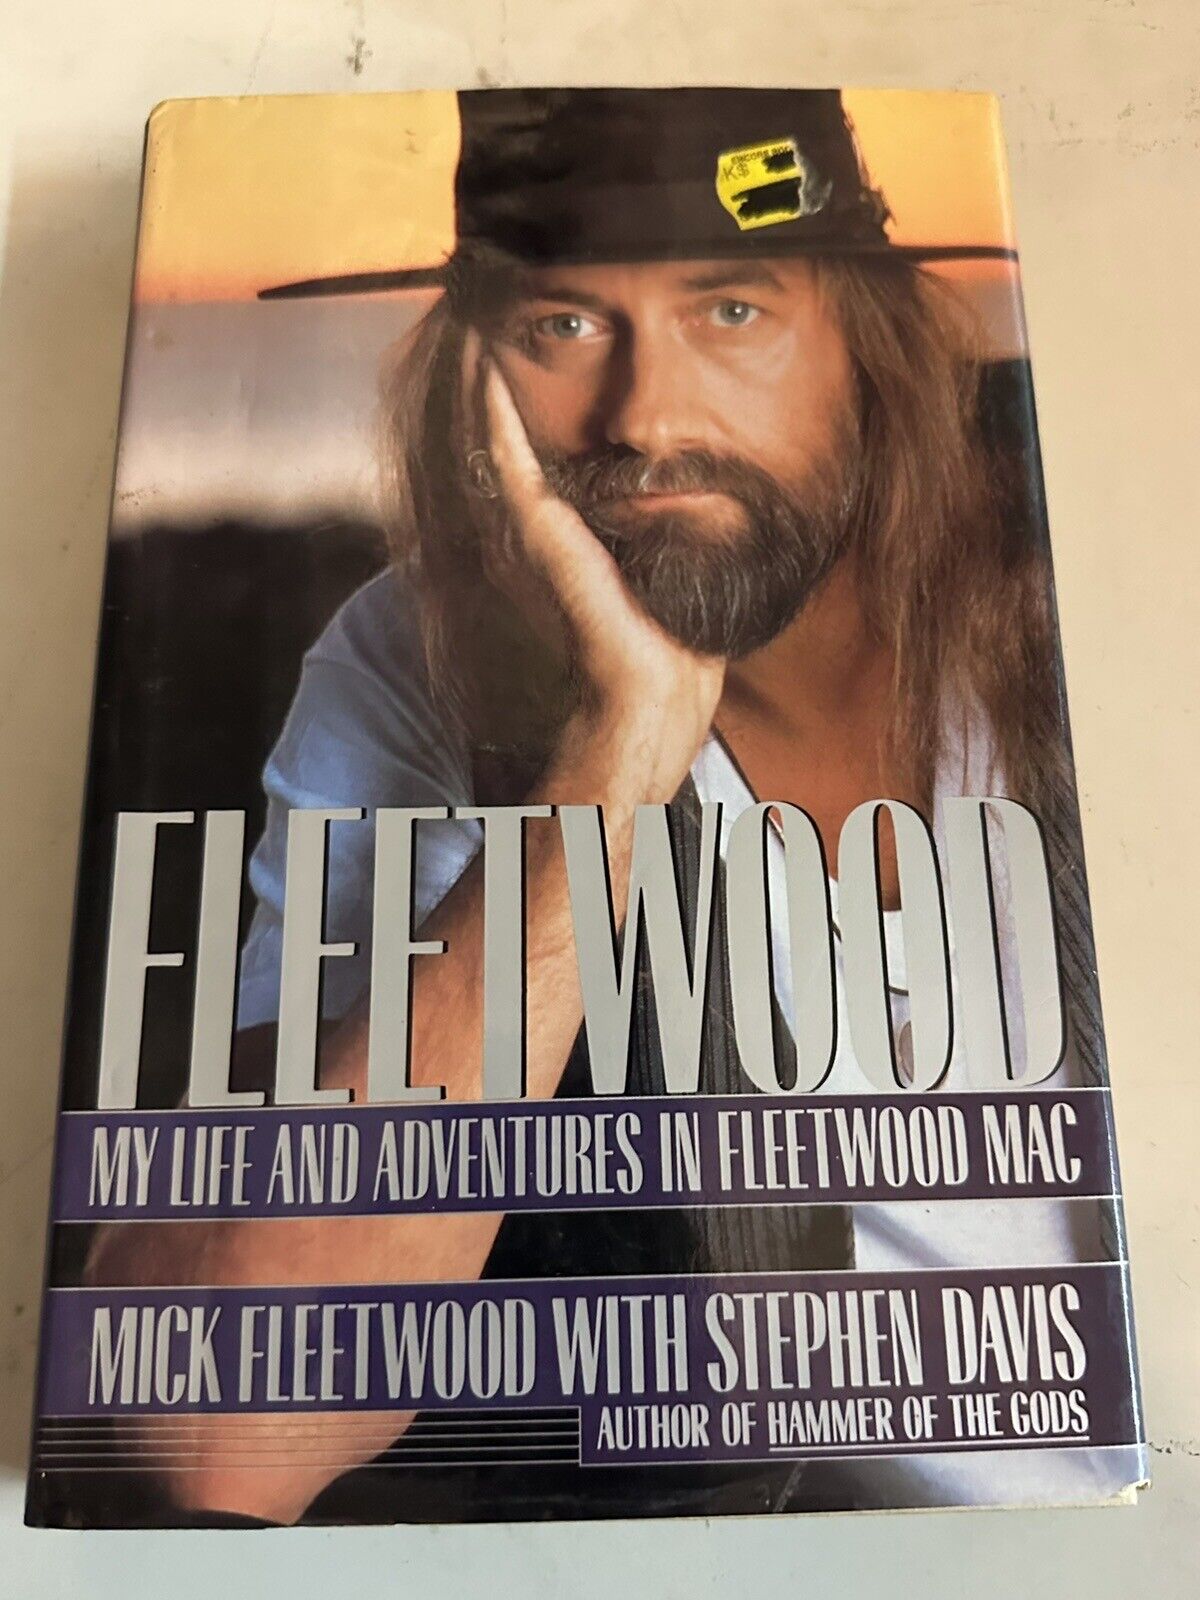 Fleetwood : My Life and Adventures in Fleetwood Mac by Stephen Davis and Mick...